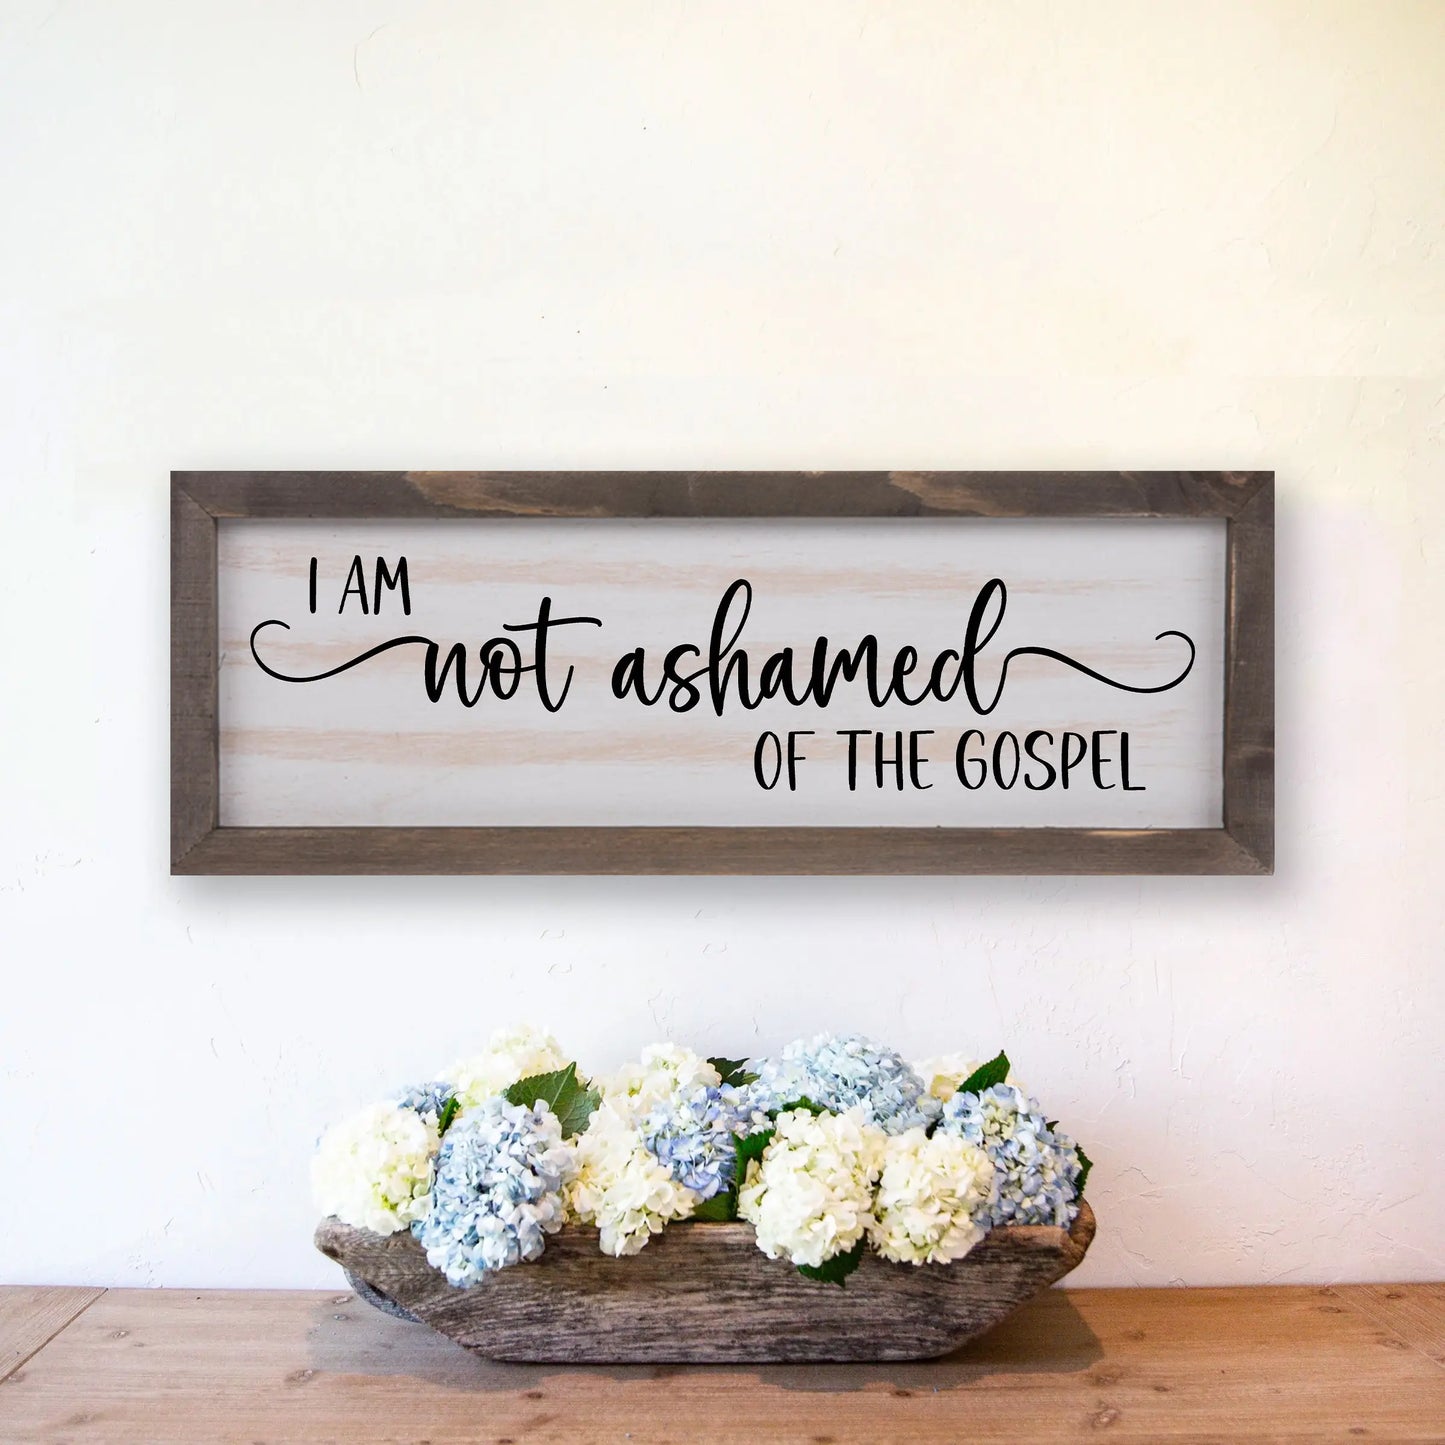 Copy of Love One Another Rustic Whitewash Wood Frame Scripture Sign | John 13:34 amazingfaithdesigns